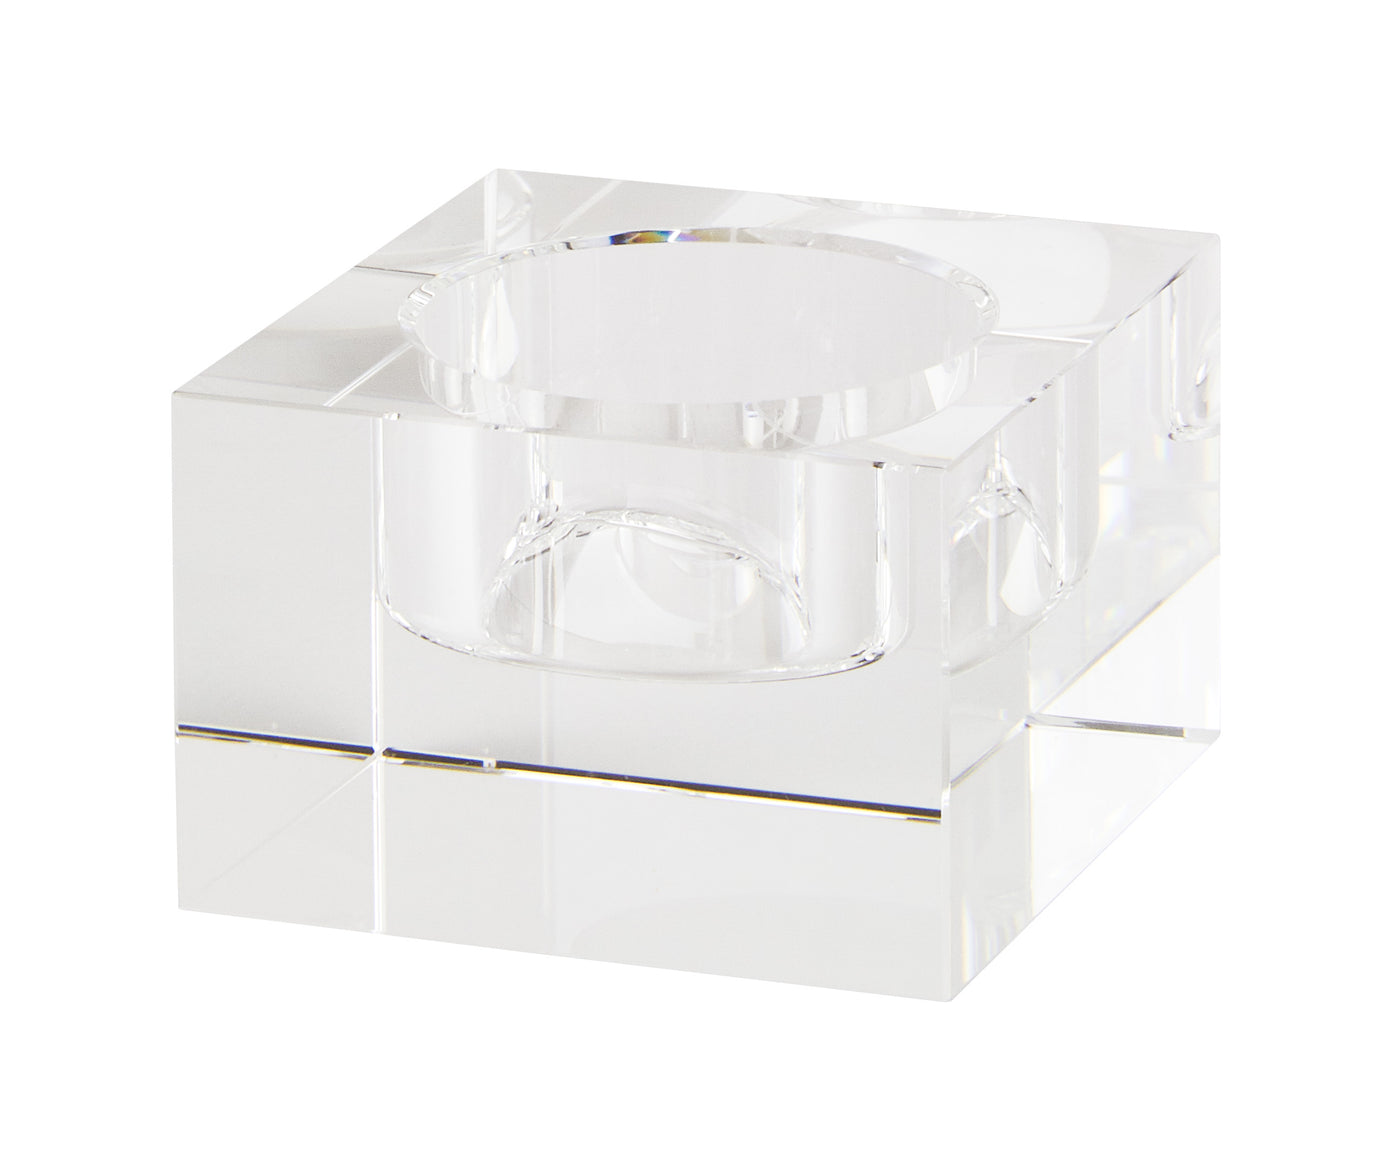 TEALITE HOLDER GLASS SMALL (Available in 2 Colors)